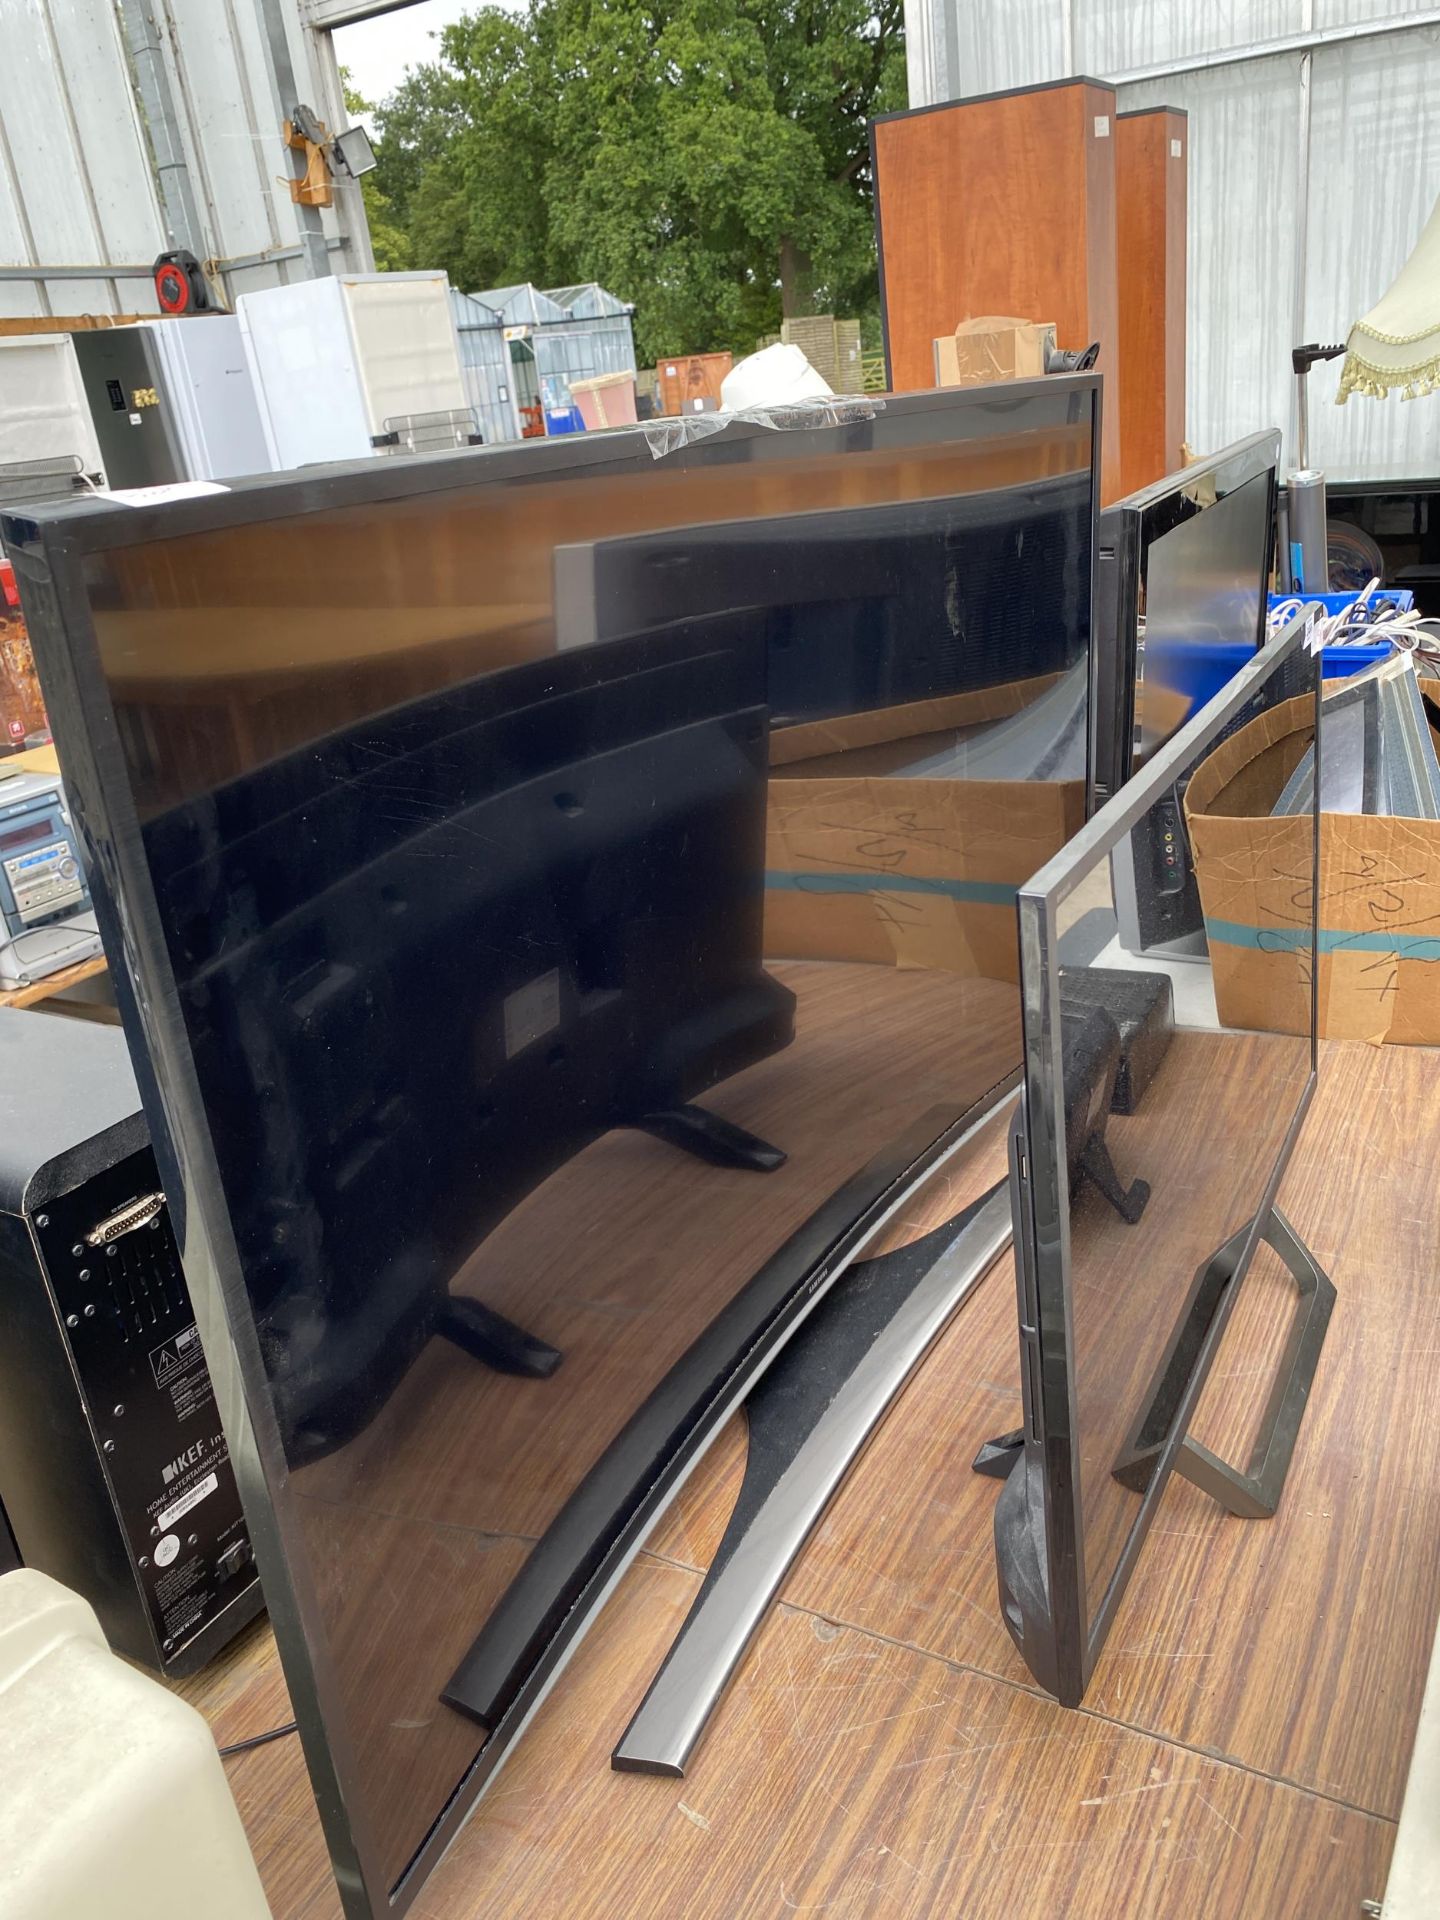 A SONY FLATSCREEN TELEVSION TOGETHER WITH LARGER CURVED SAMSUNG TELEVISION - Image 2 of 3